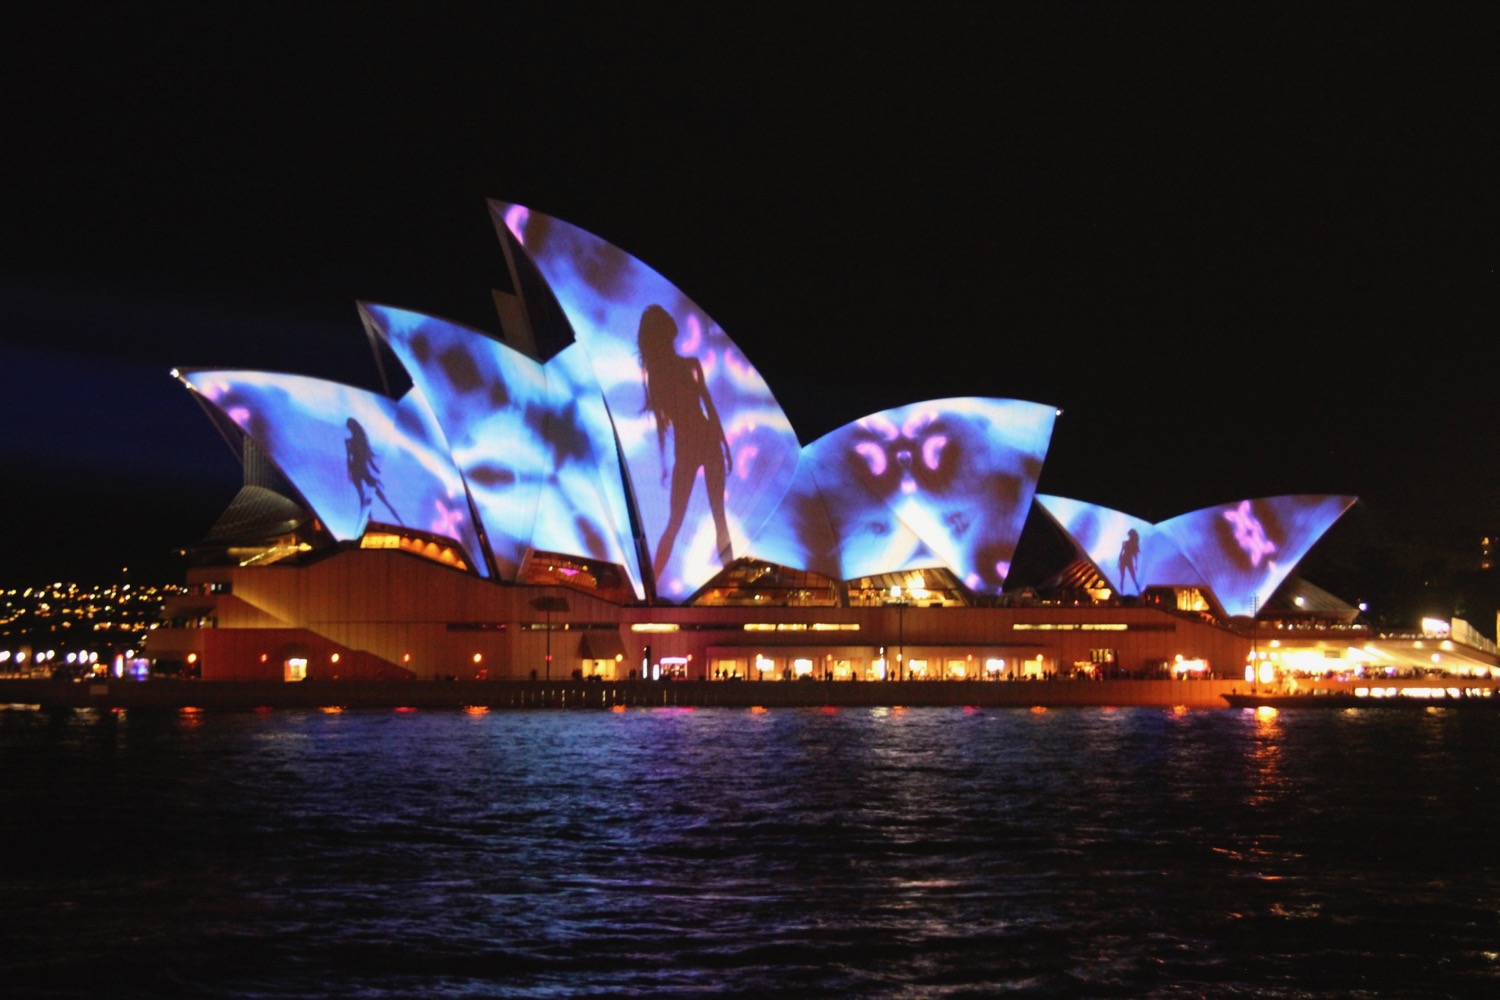 Sydney Opera House with lights on the roof